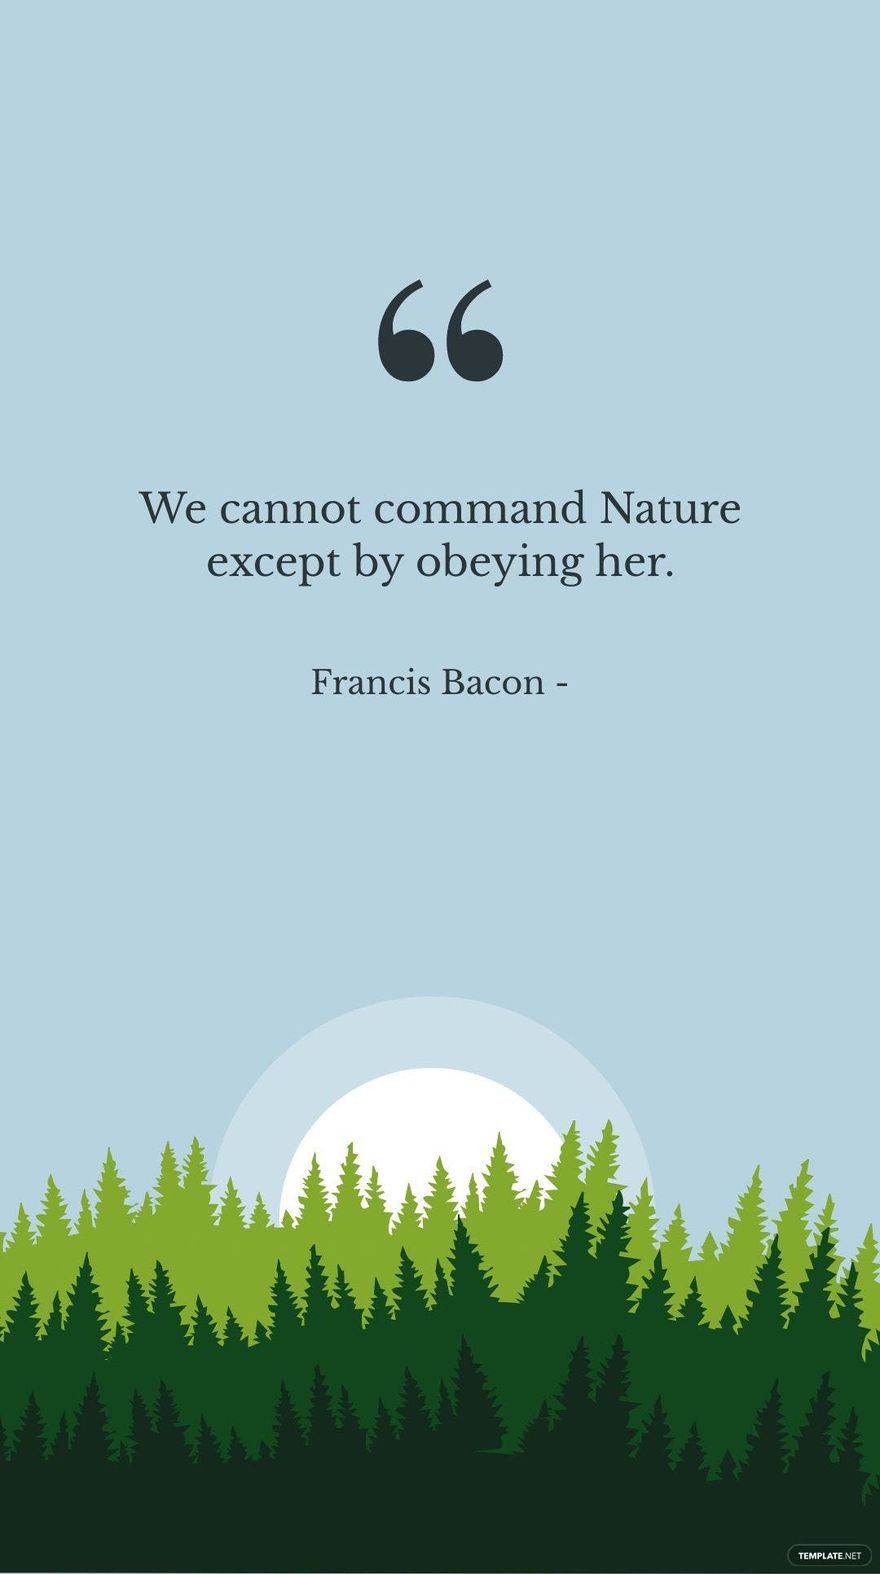 Francis Bacon - We cannot command Nature except by obeying her.